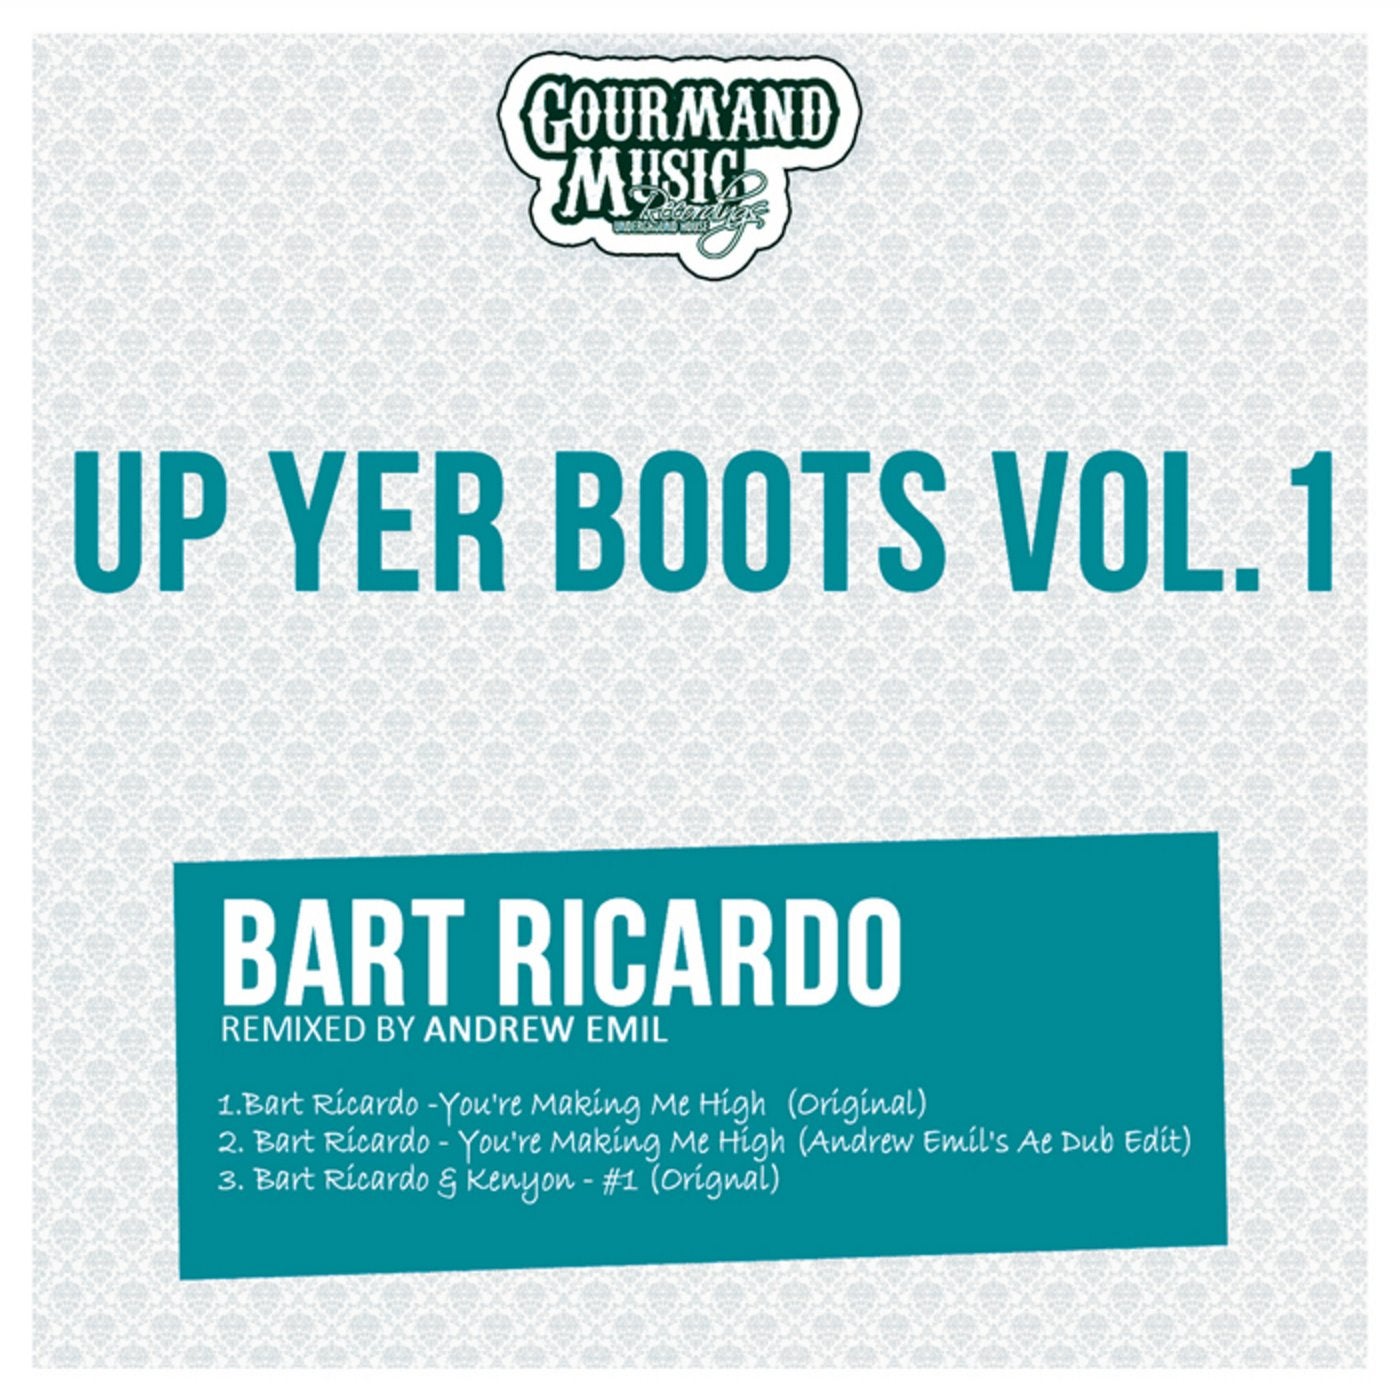 Up Yer Boots Vol.1